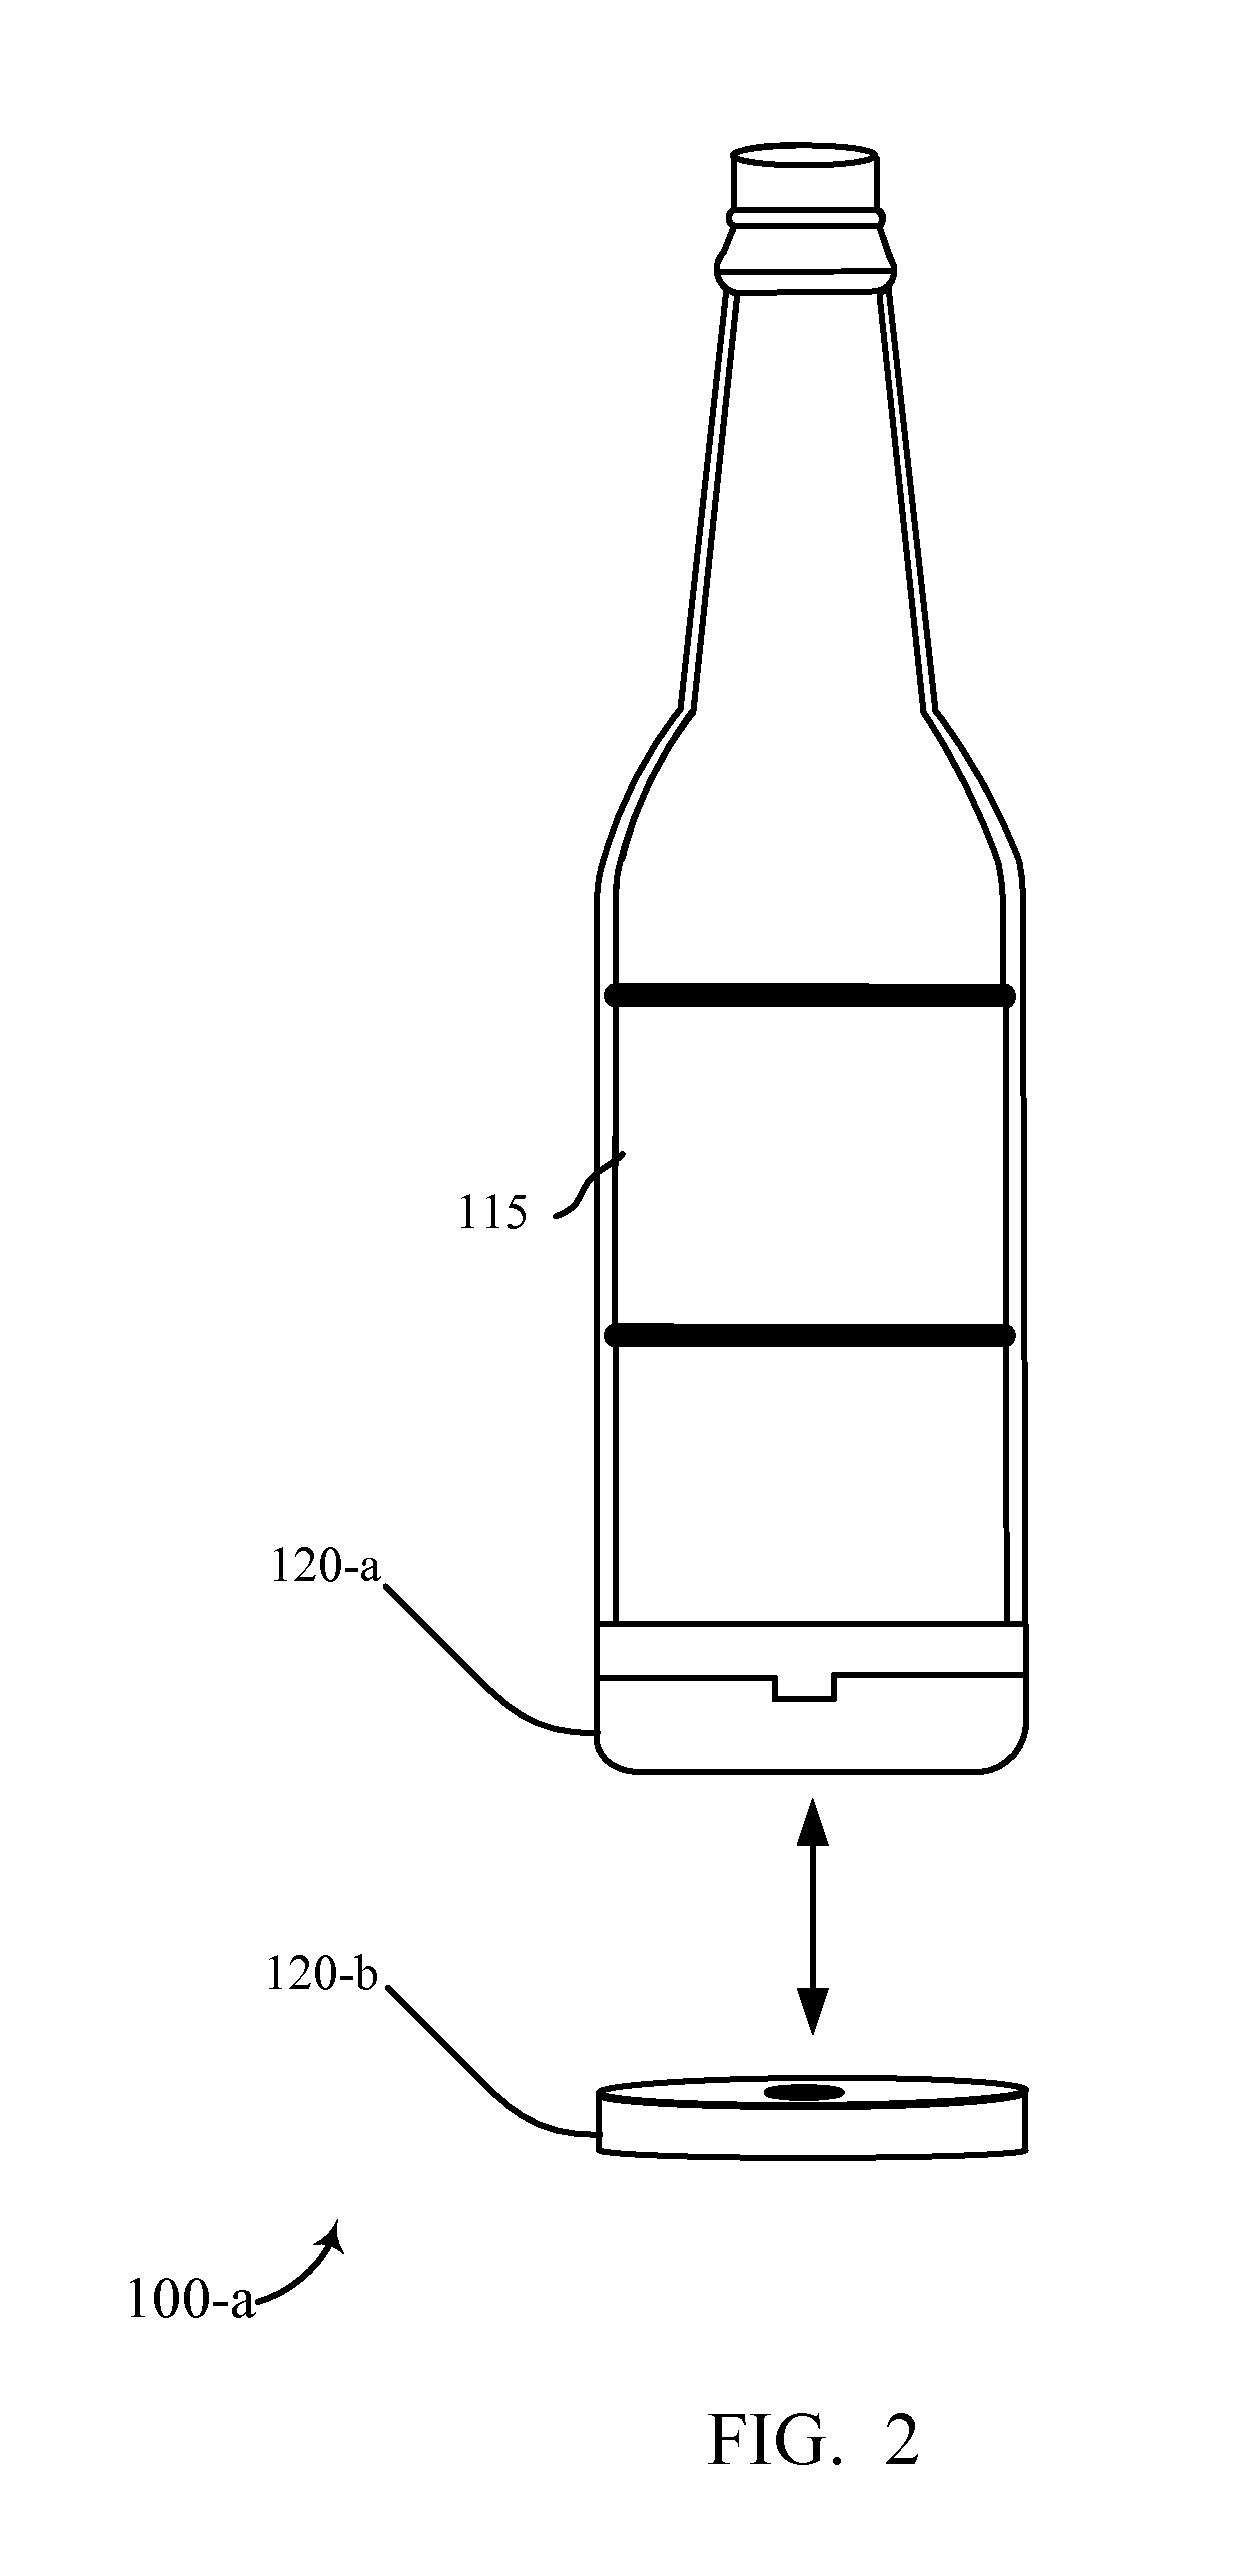 Refill station using an intelligent beverage container